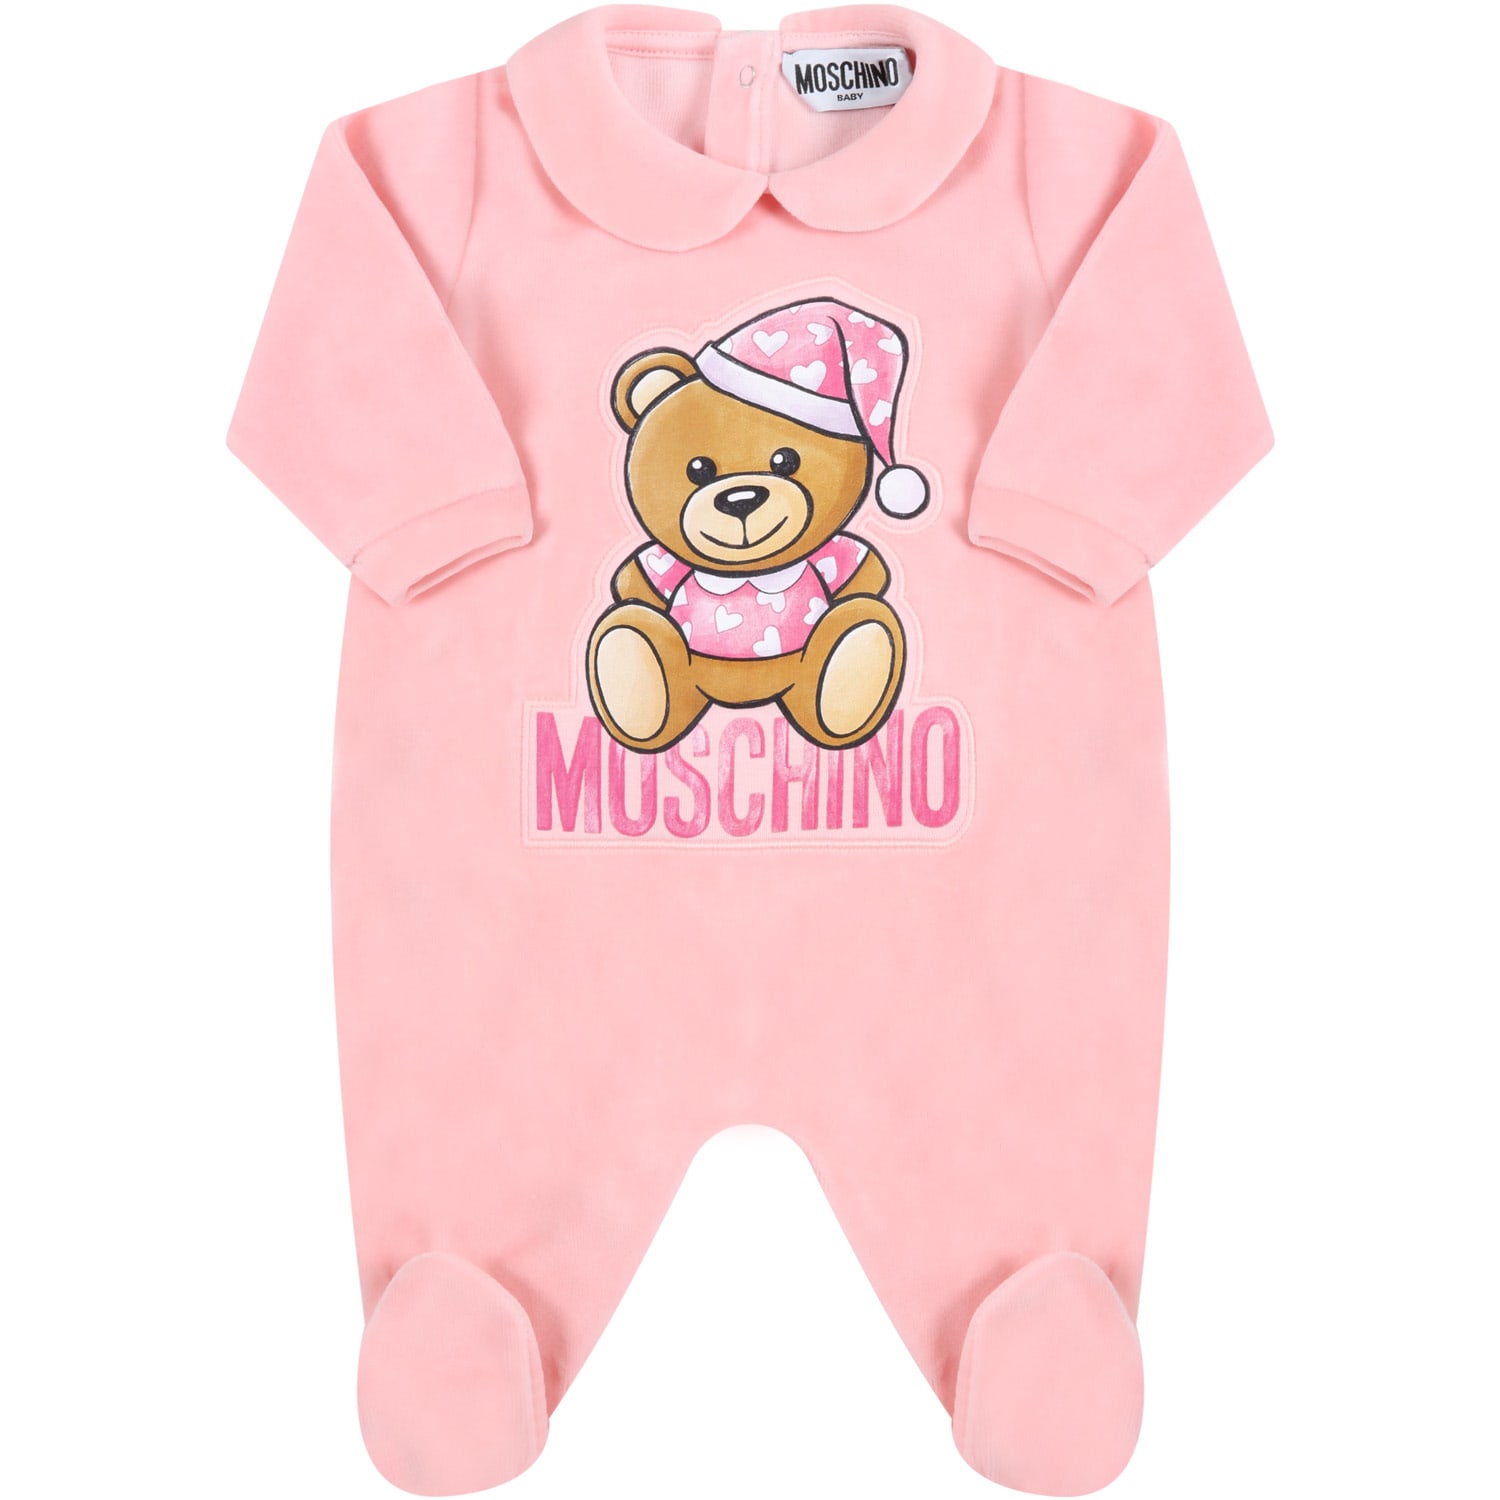 Moschino Pink Babygrow For Baby Girl With Teddy Bear